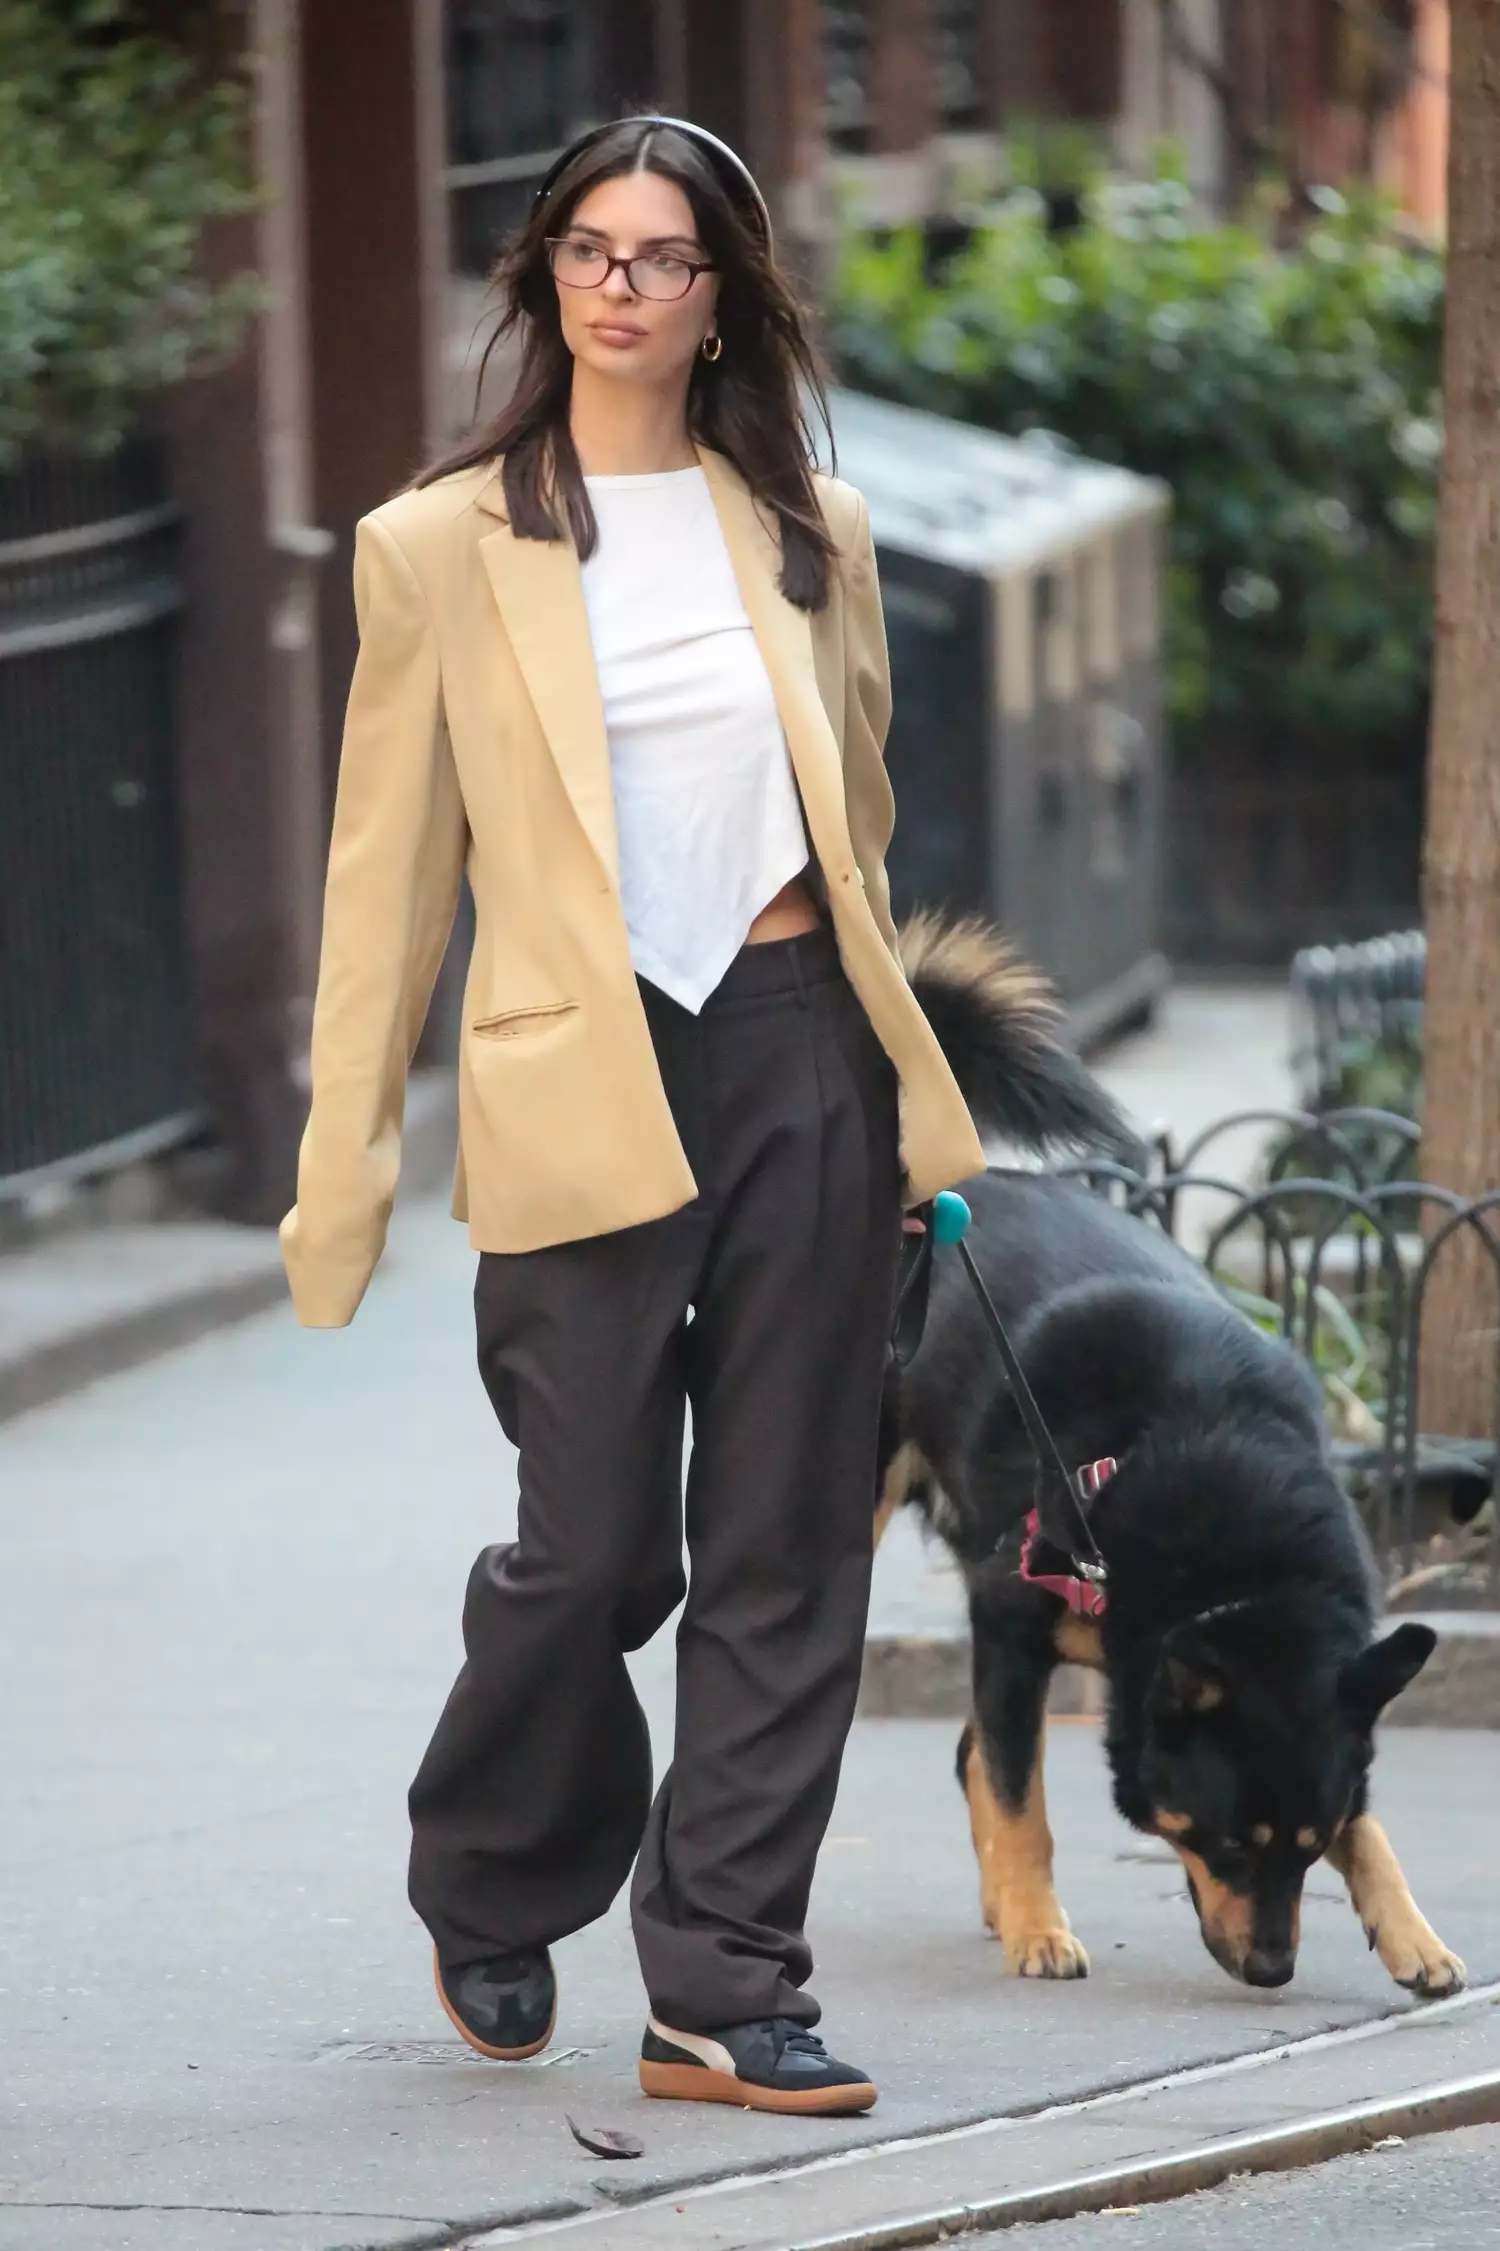 Emily Ratajkowski Educated Us in High-Low Dressing With My Go-To Shoe